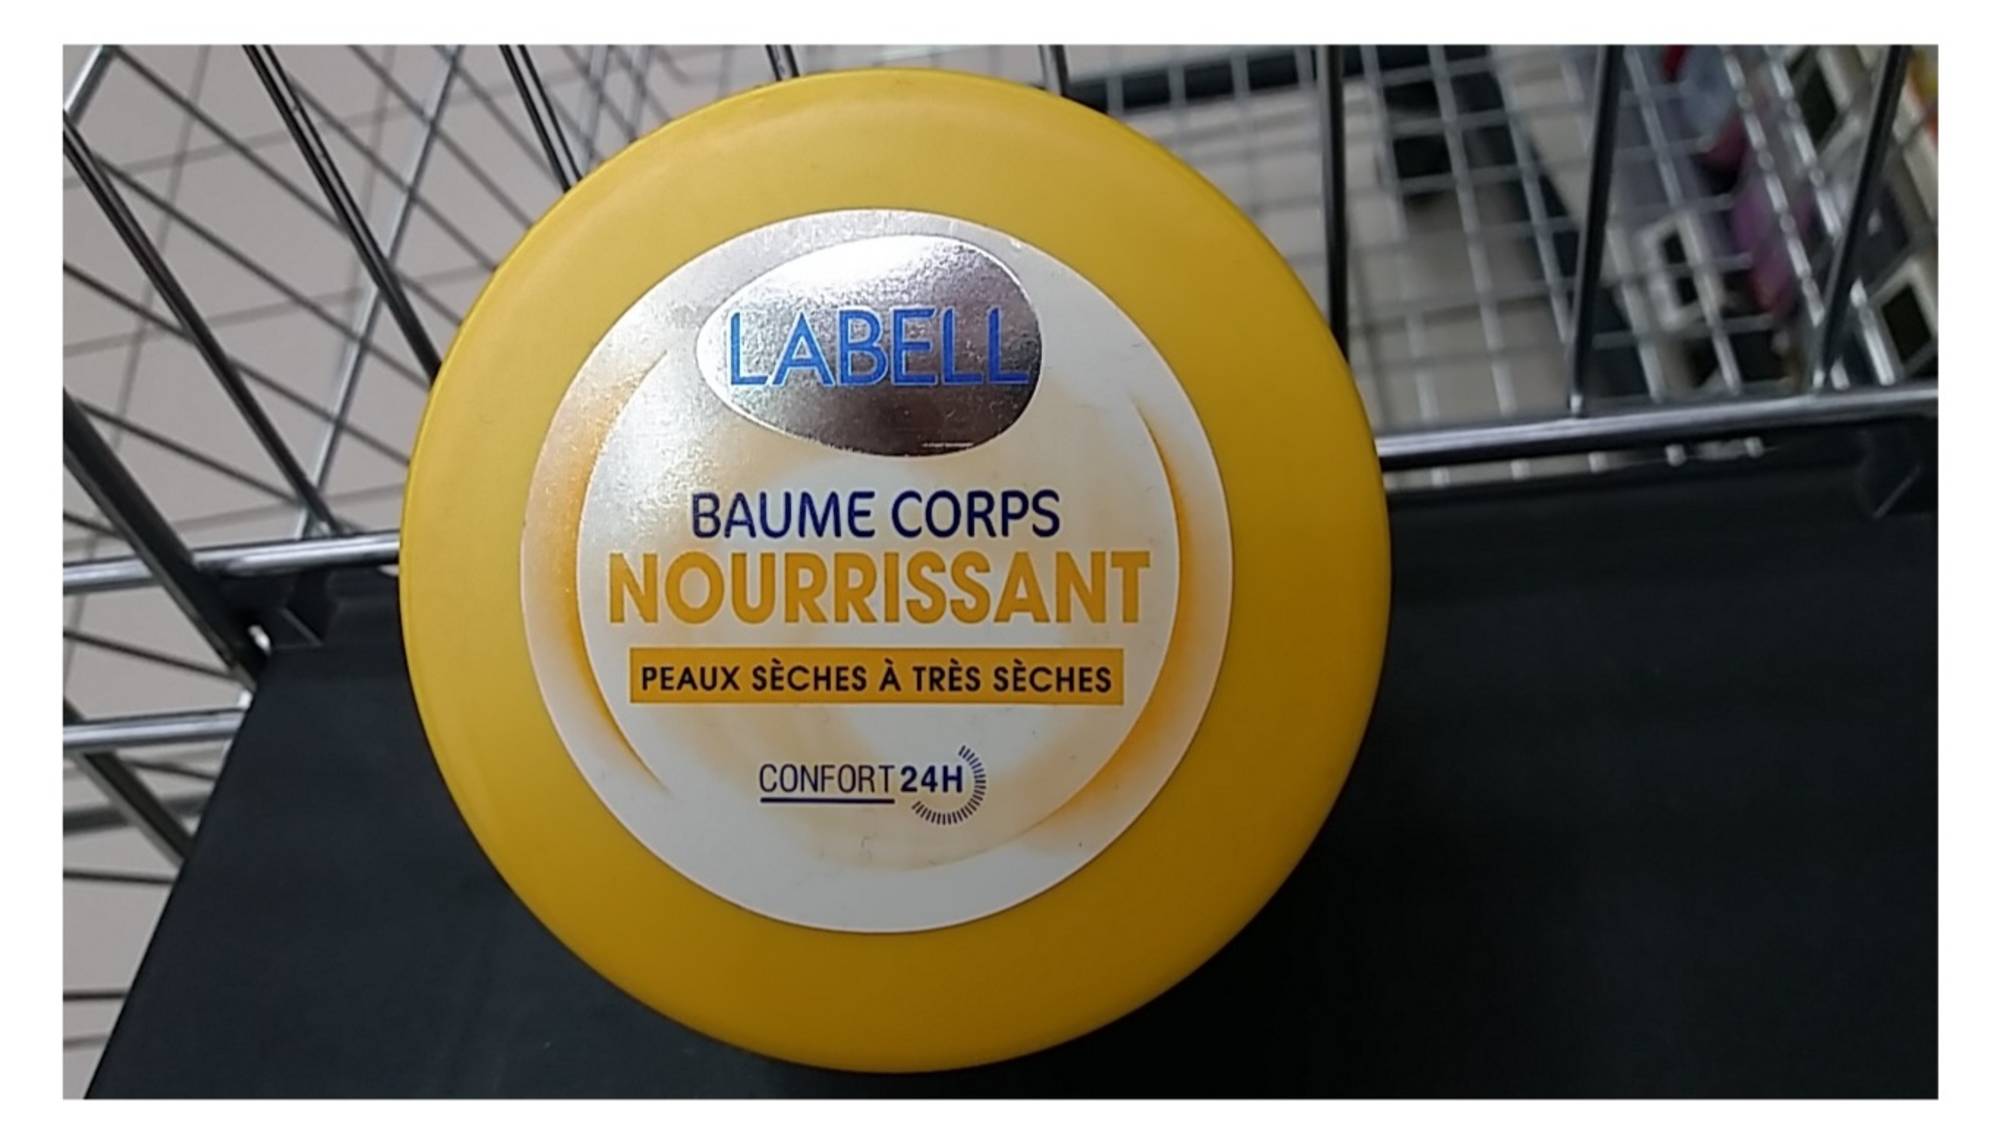 LABELL - Baume corps nourrissant 